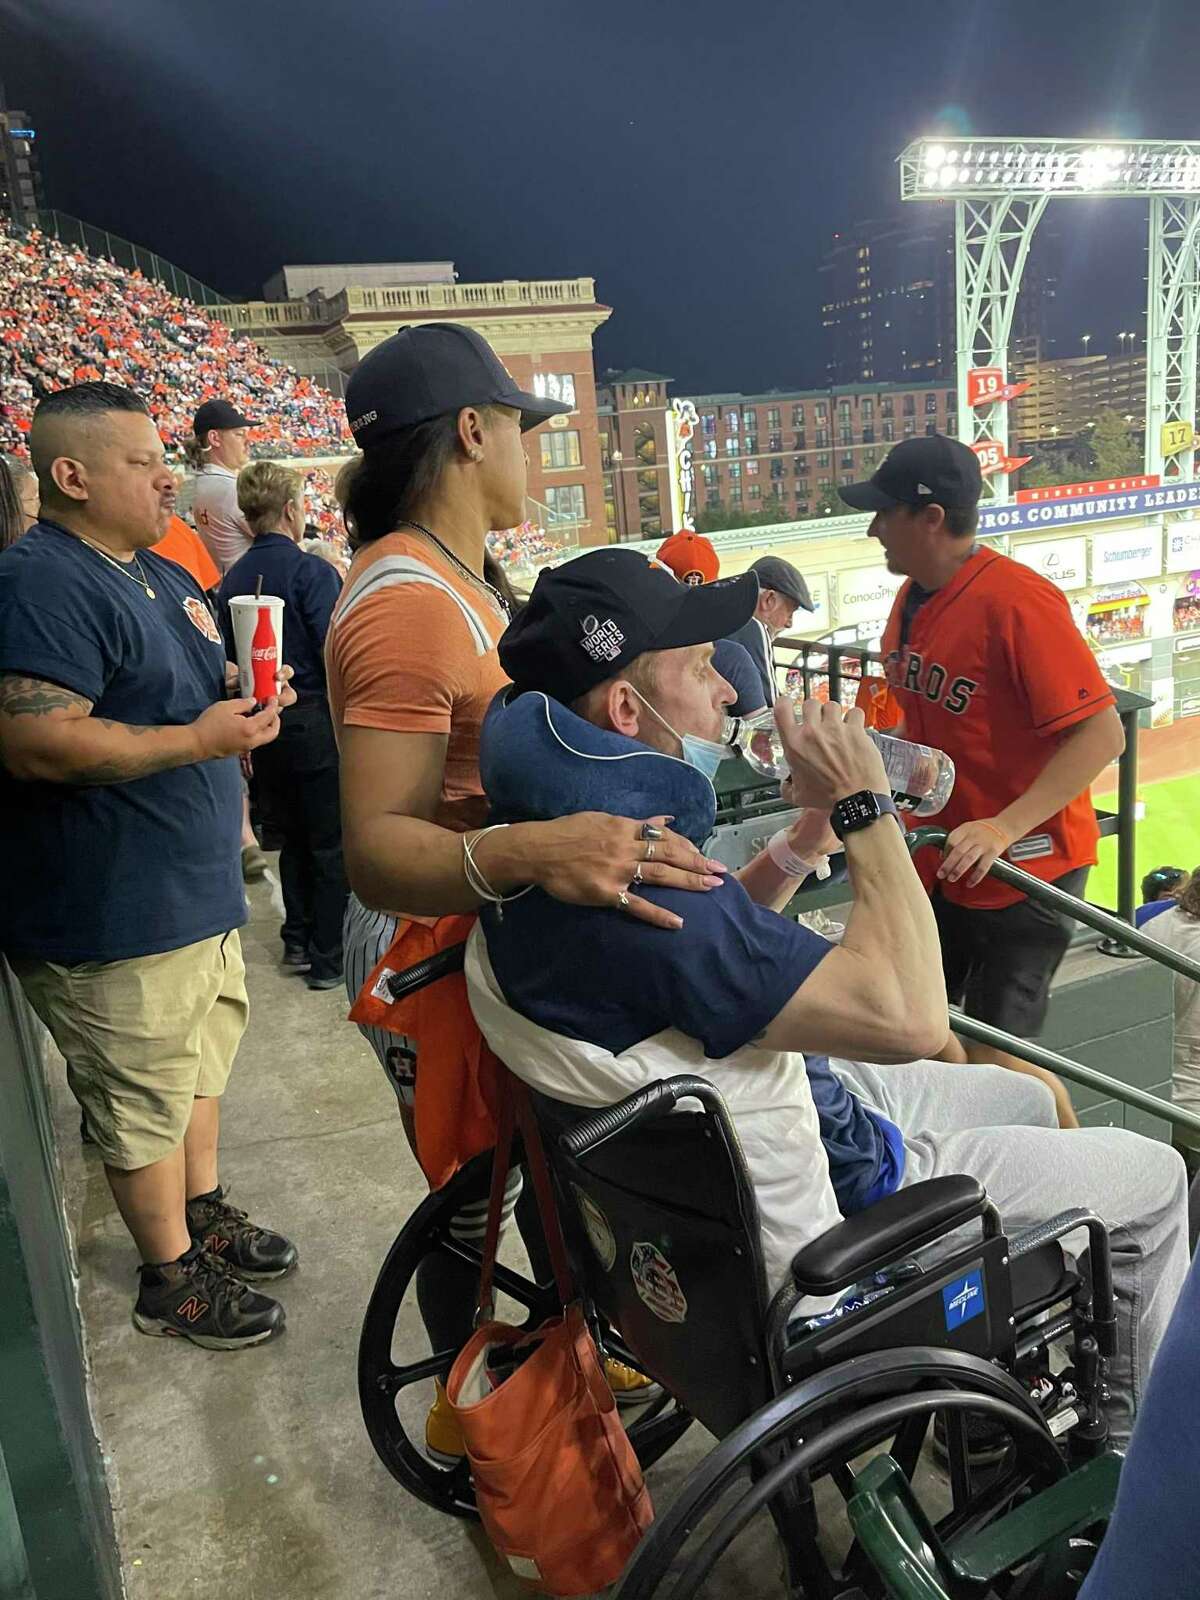 Houston fire fighter Jordan Downing attends a World Series game and crosses off one item on his bucket list. The Houston-native is battling stage 4 metastatic melanoma at age 38.